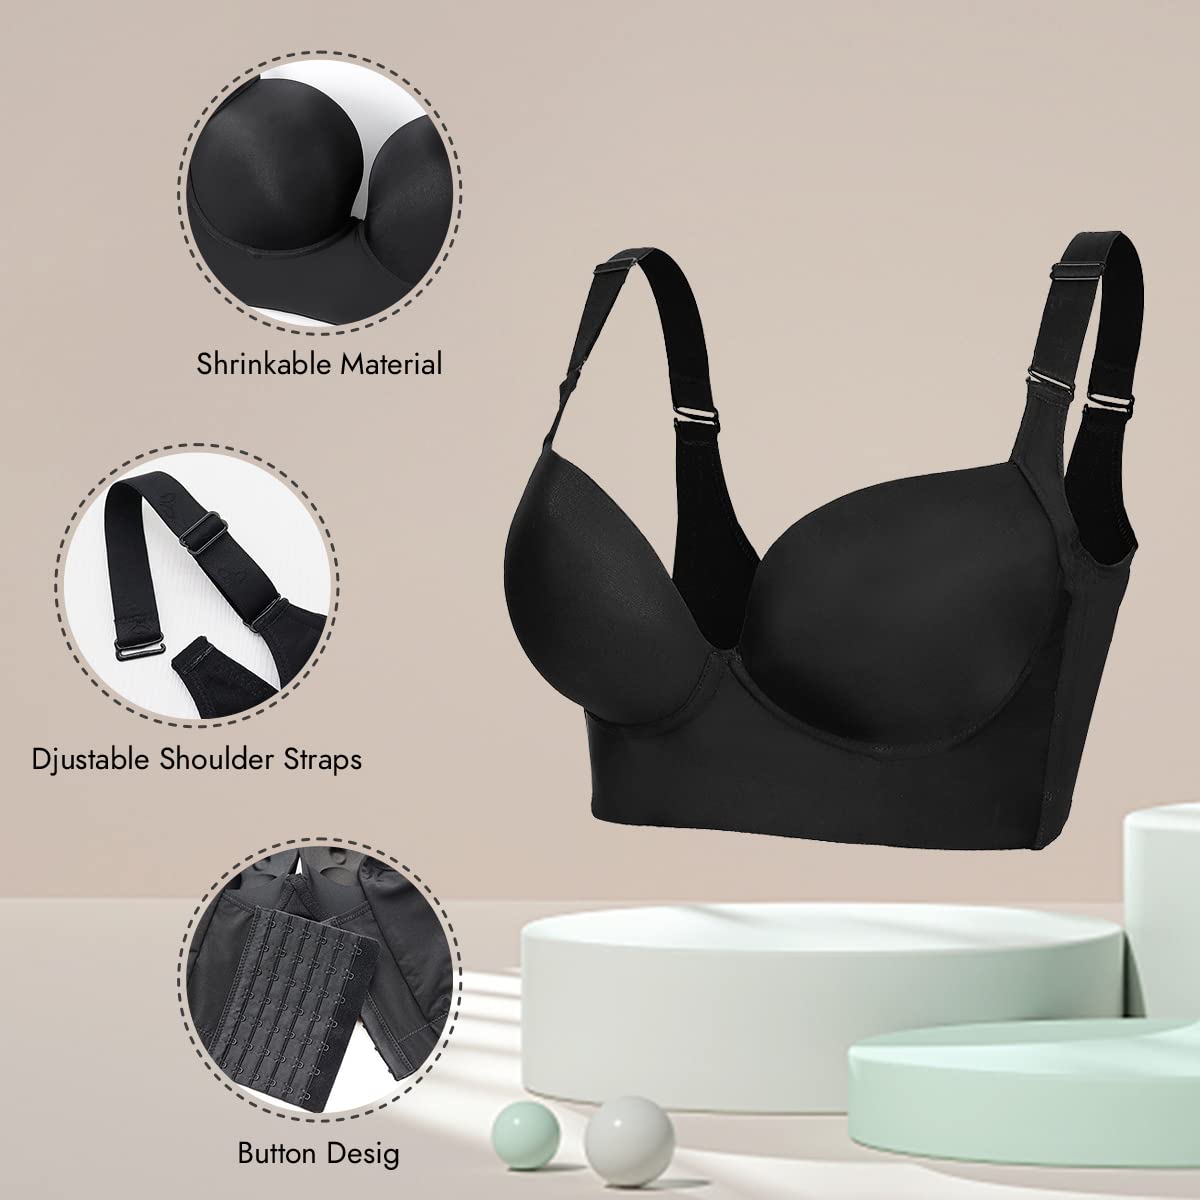 Push-Up Back Smoothing Bra（Buy 1 Get 1 Free）(2 PACK) - Woobilly